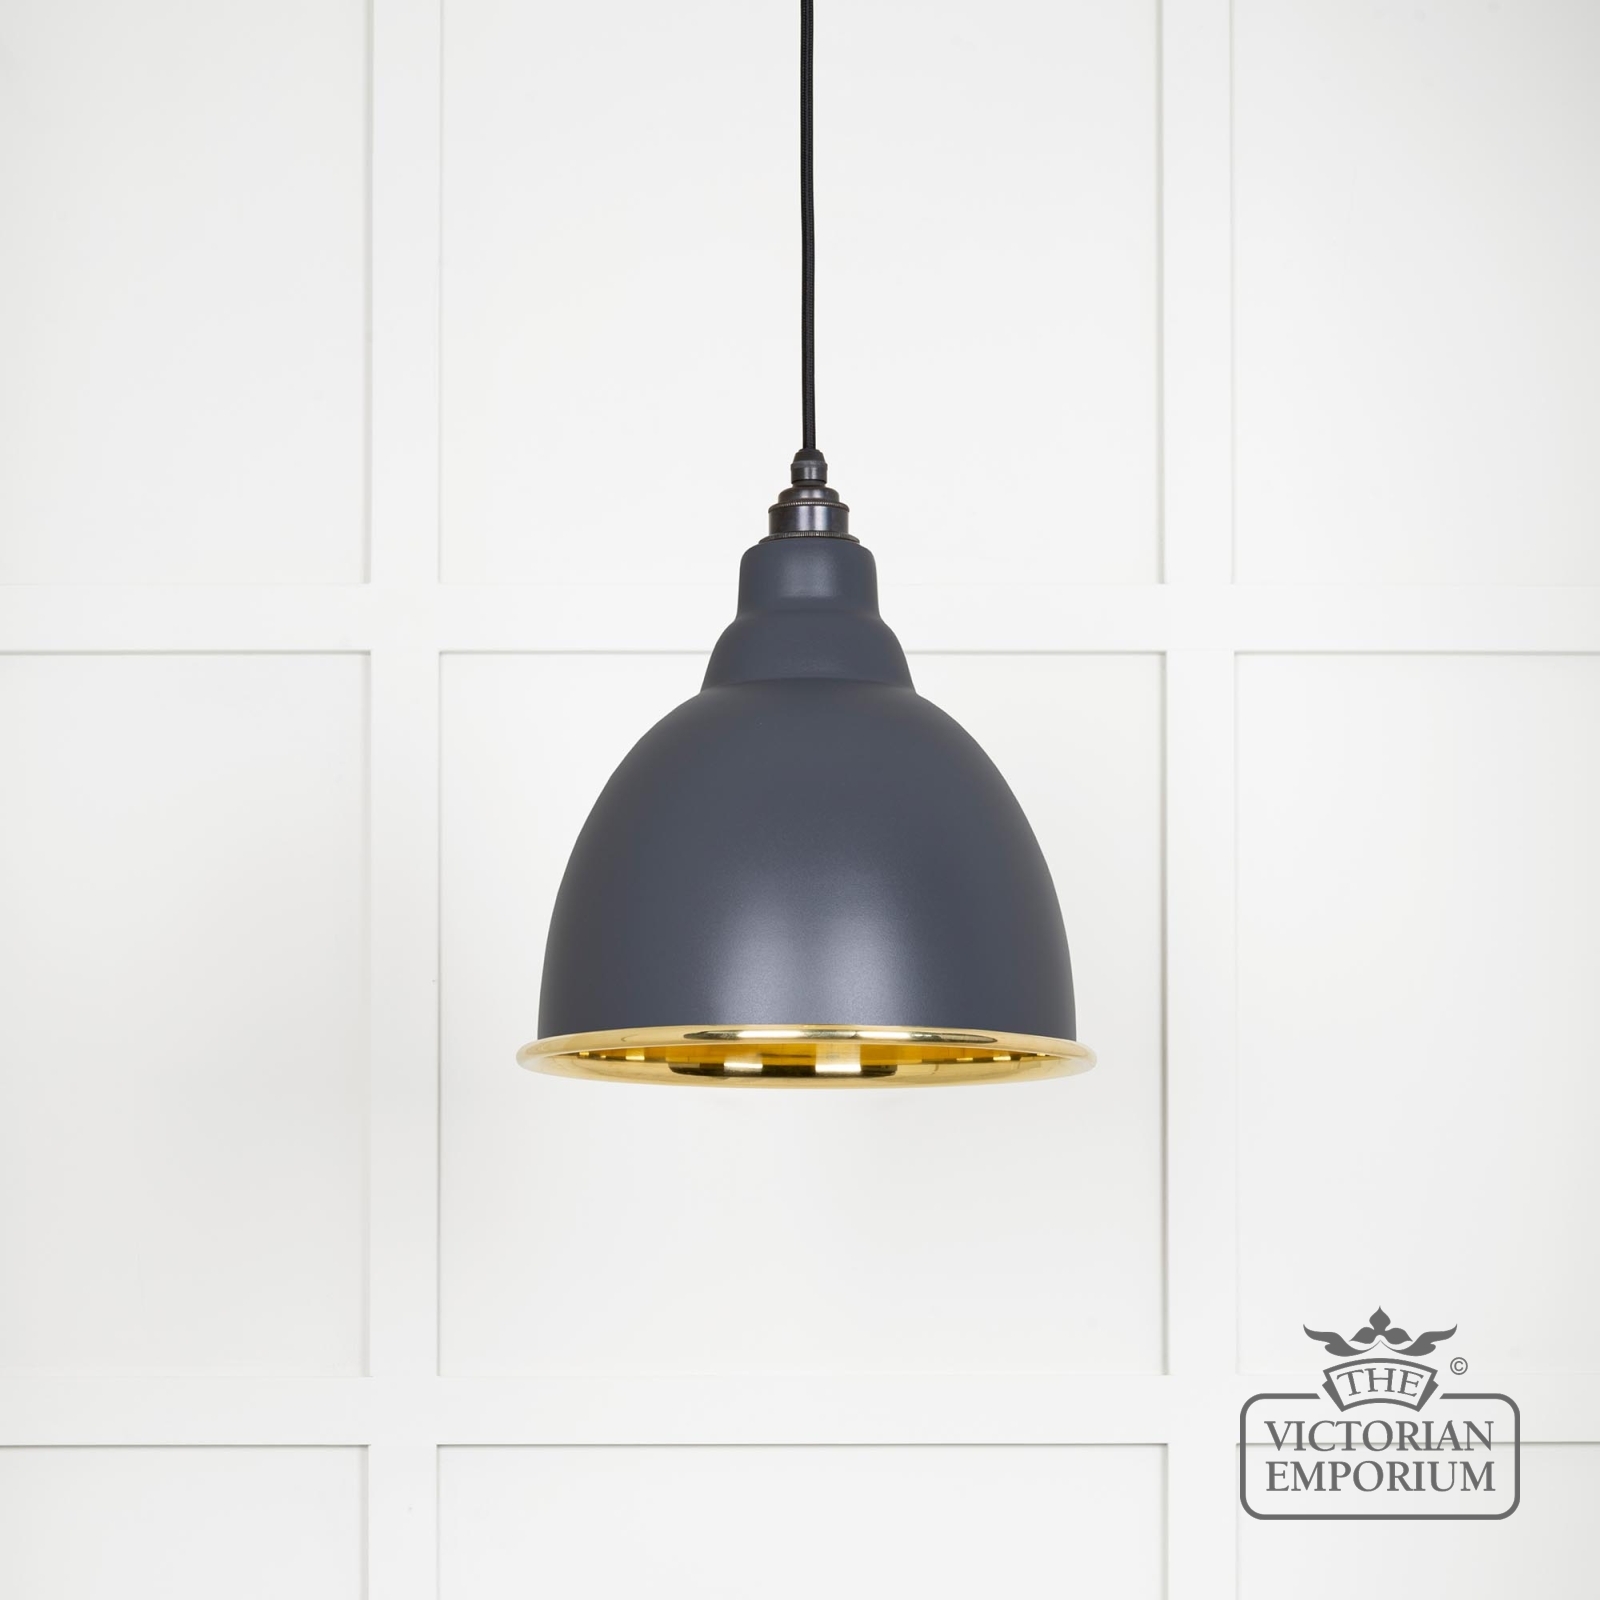 Brindle pendant light in Smooth brass and Slate finish